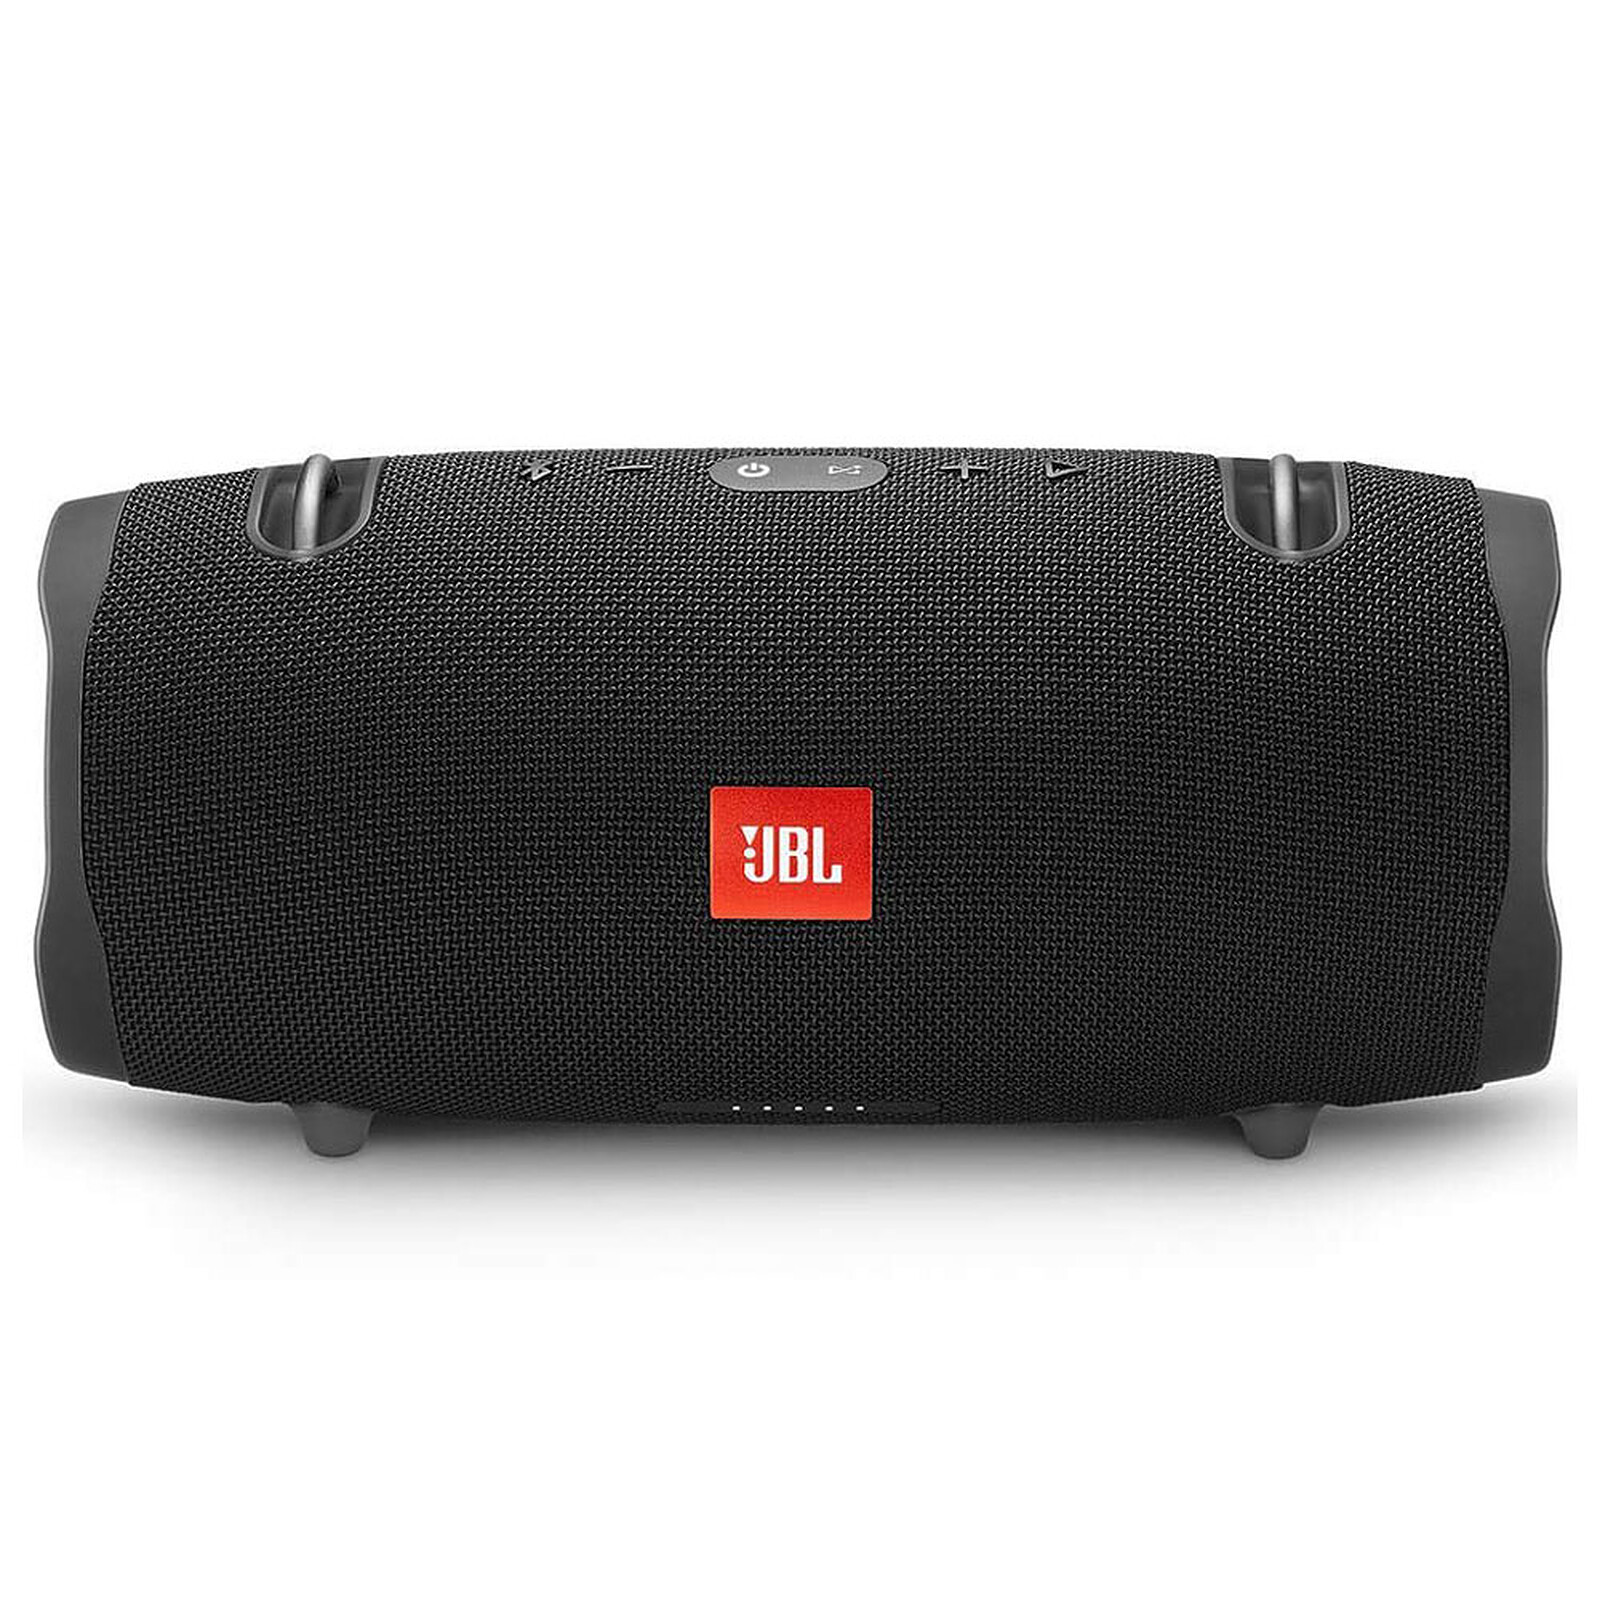 jbl-xtreme-firmware-update-xtreme-2-standing-review-position